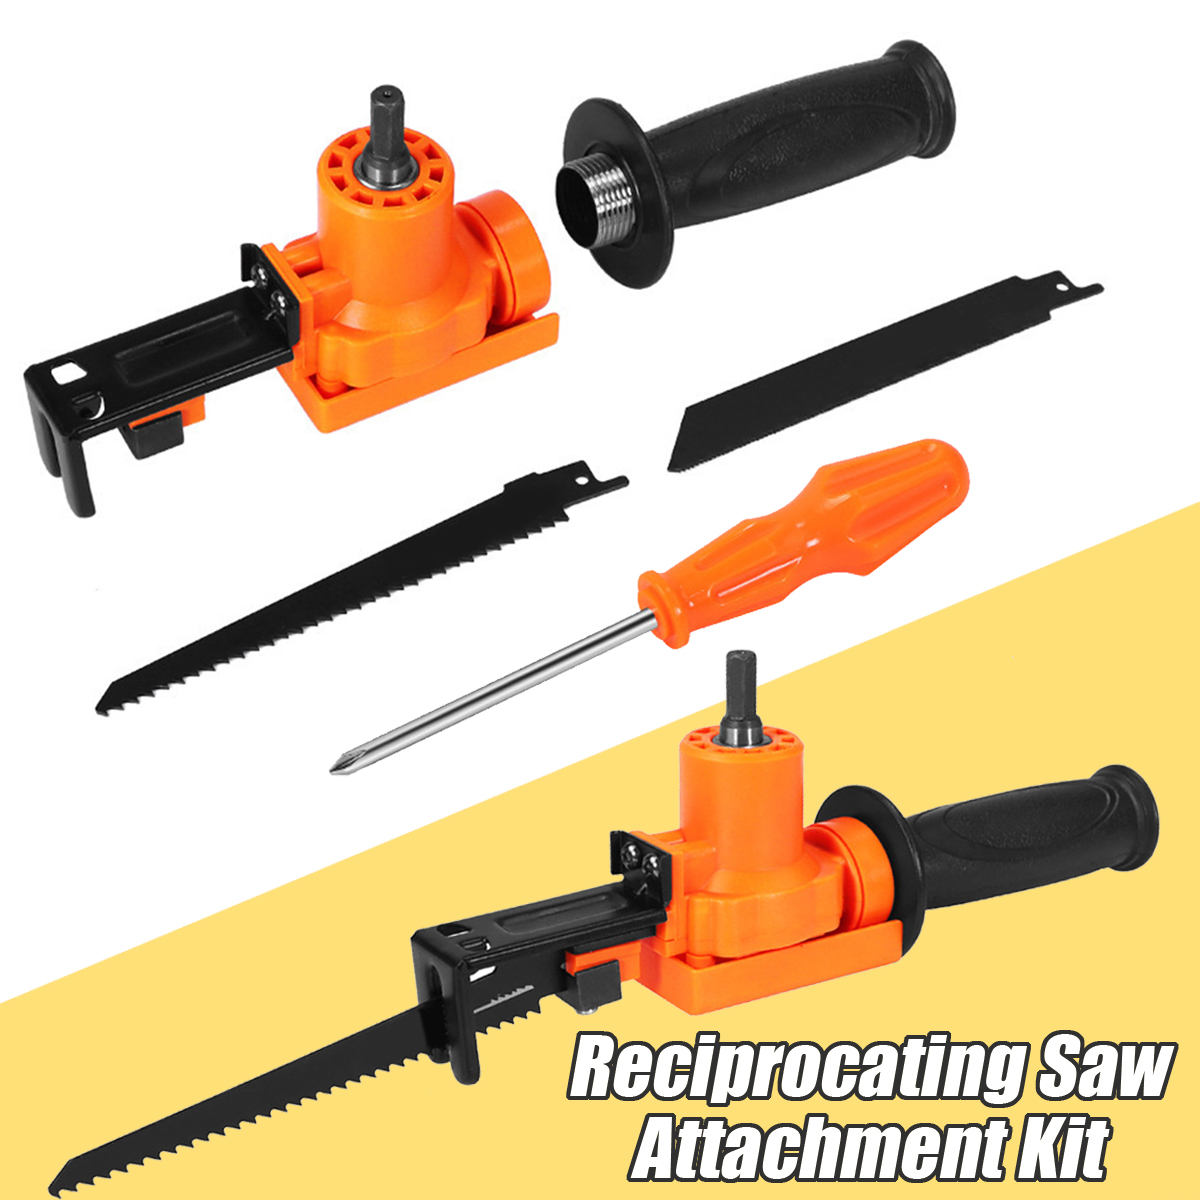 Reciprocating-Saw-Attachment-Adapter-Change-Electric-Drill-Into-Reciprocating-Saw-for-Wood-Metal-Cut-1725363-2